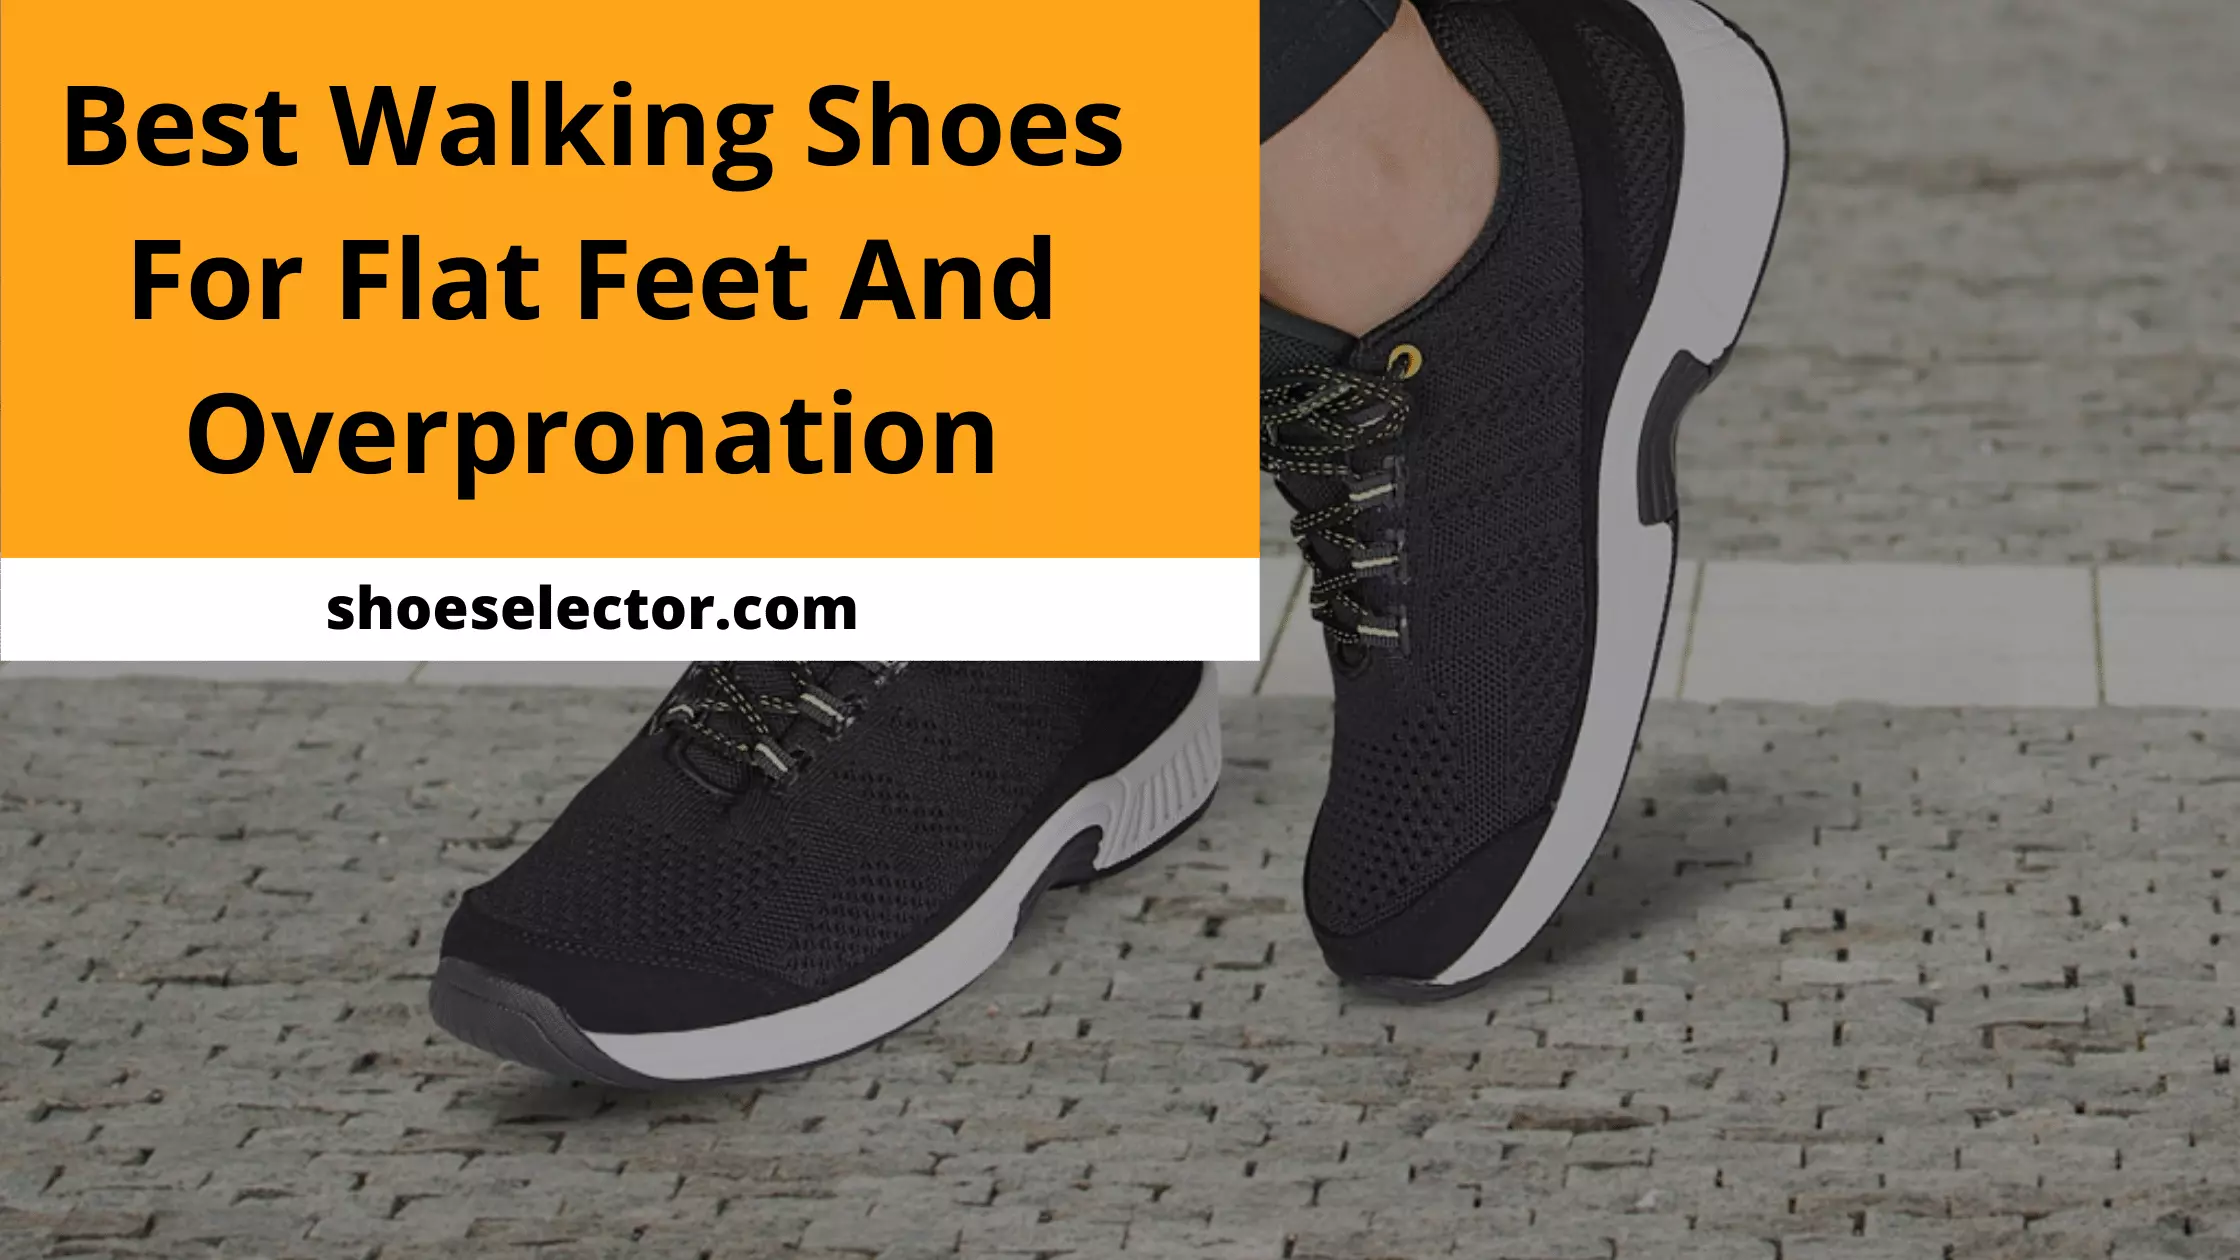 Best Walking Shoes For Flat Feet And Overpronation With Details